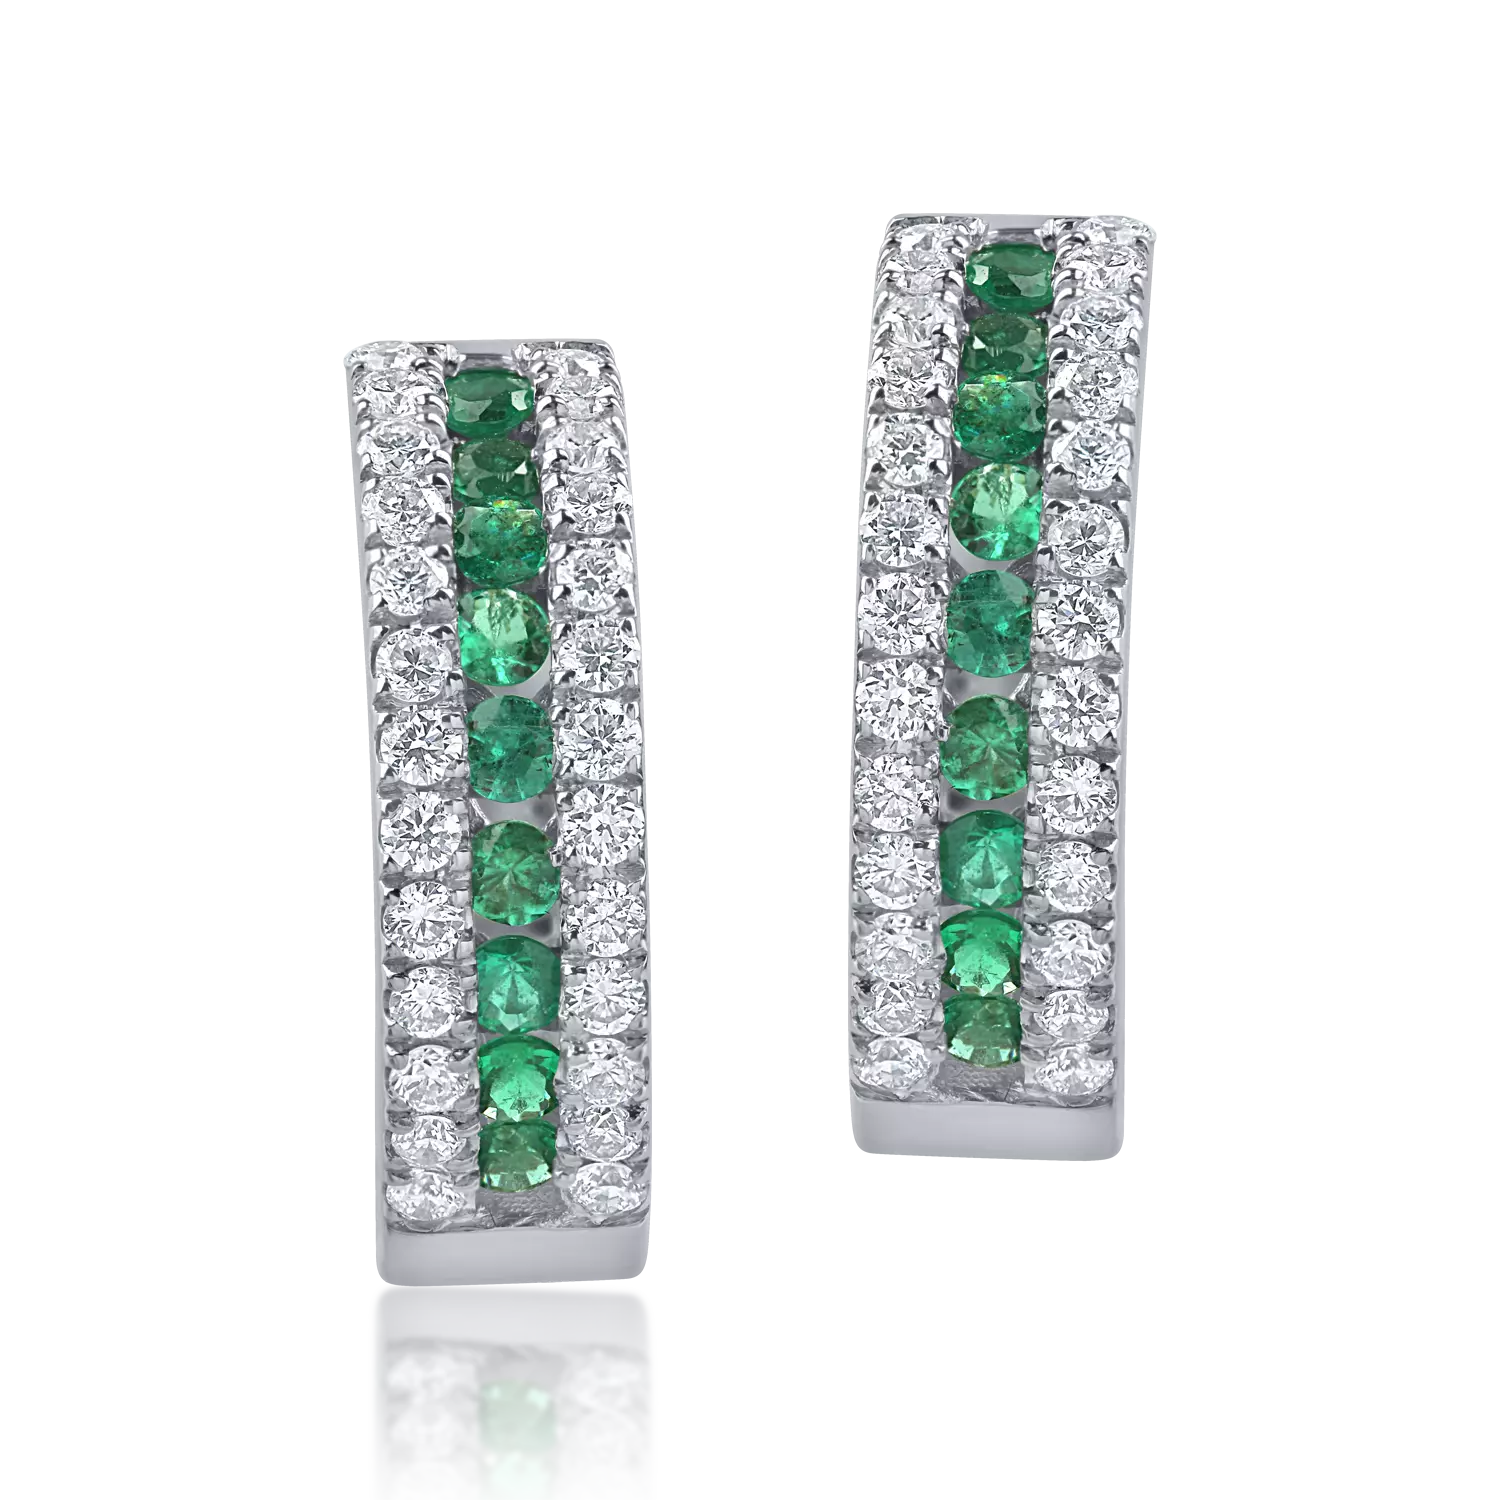 White gold earrings with 0.26ct emeralds and 0.32ct diamonds